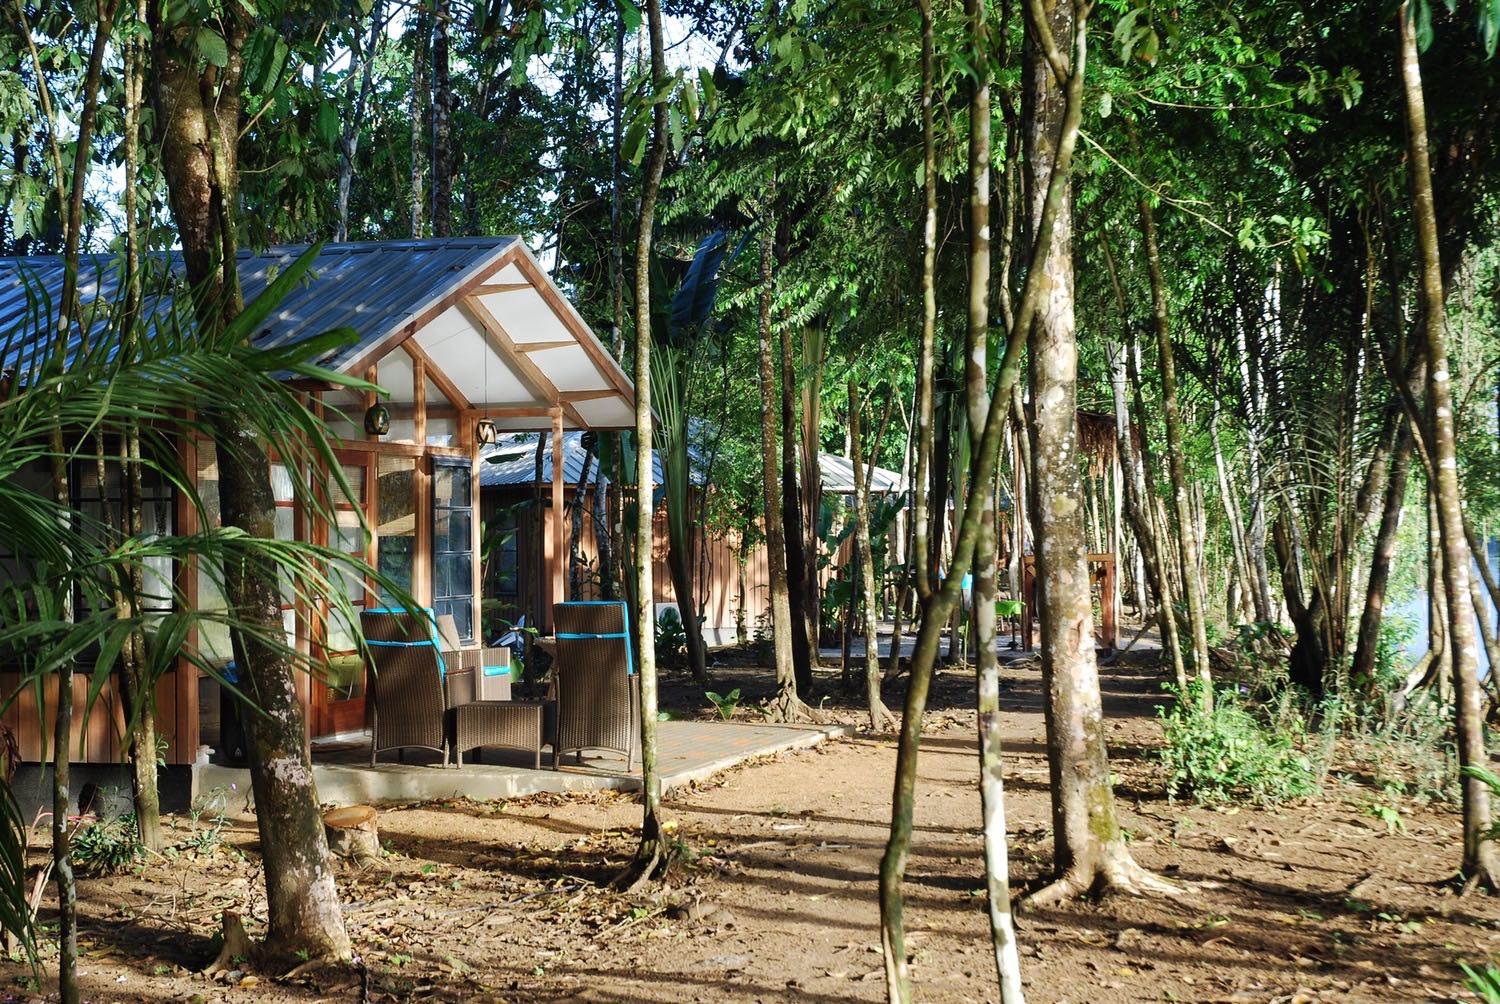 View of the lodges in the forest